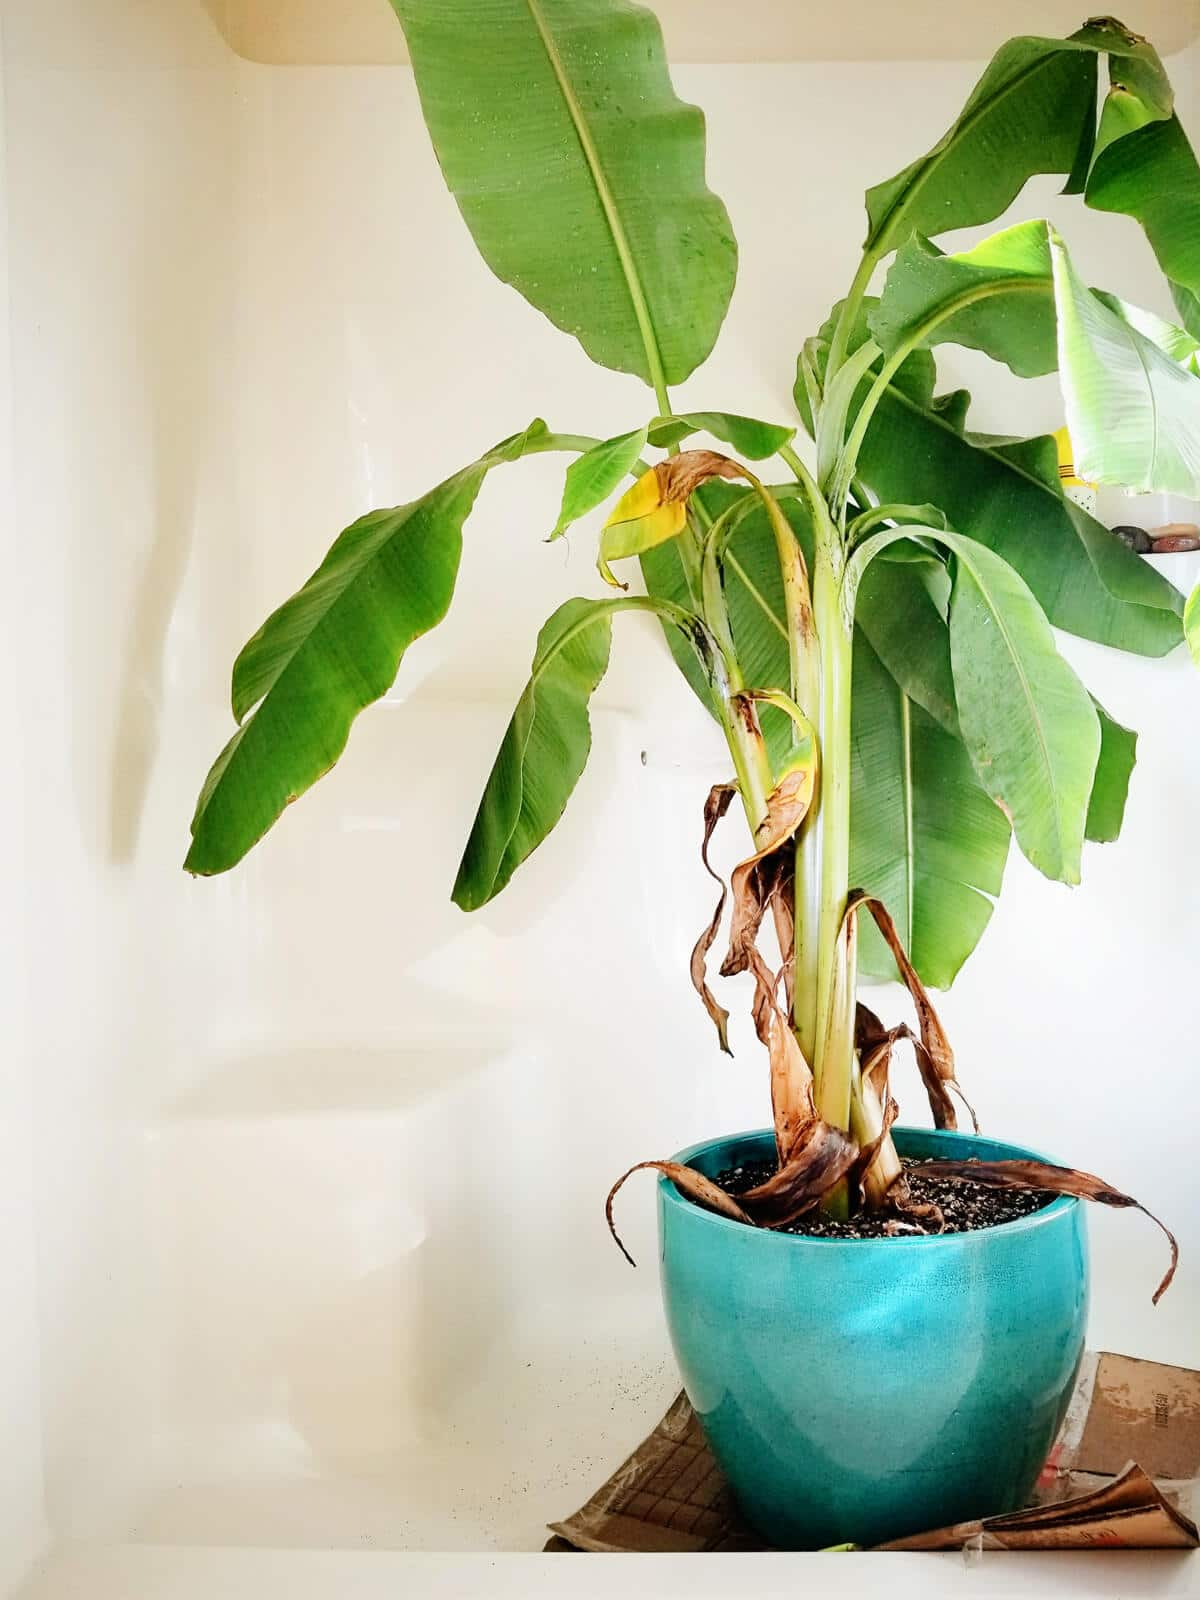 Spring cleaning tip: don't forget to shower your houseplants